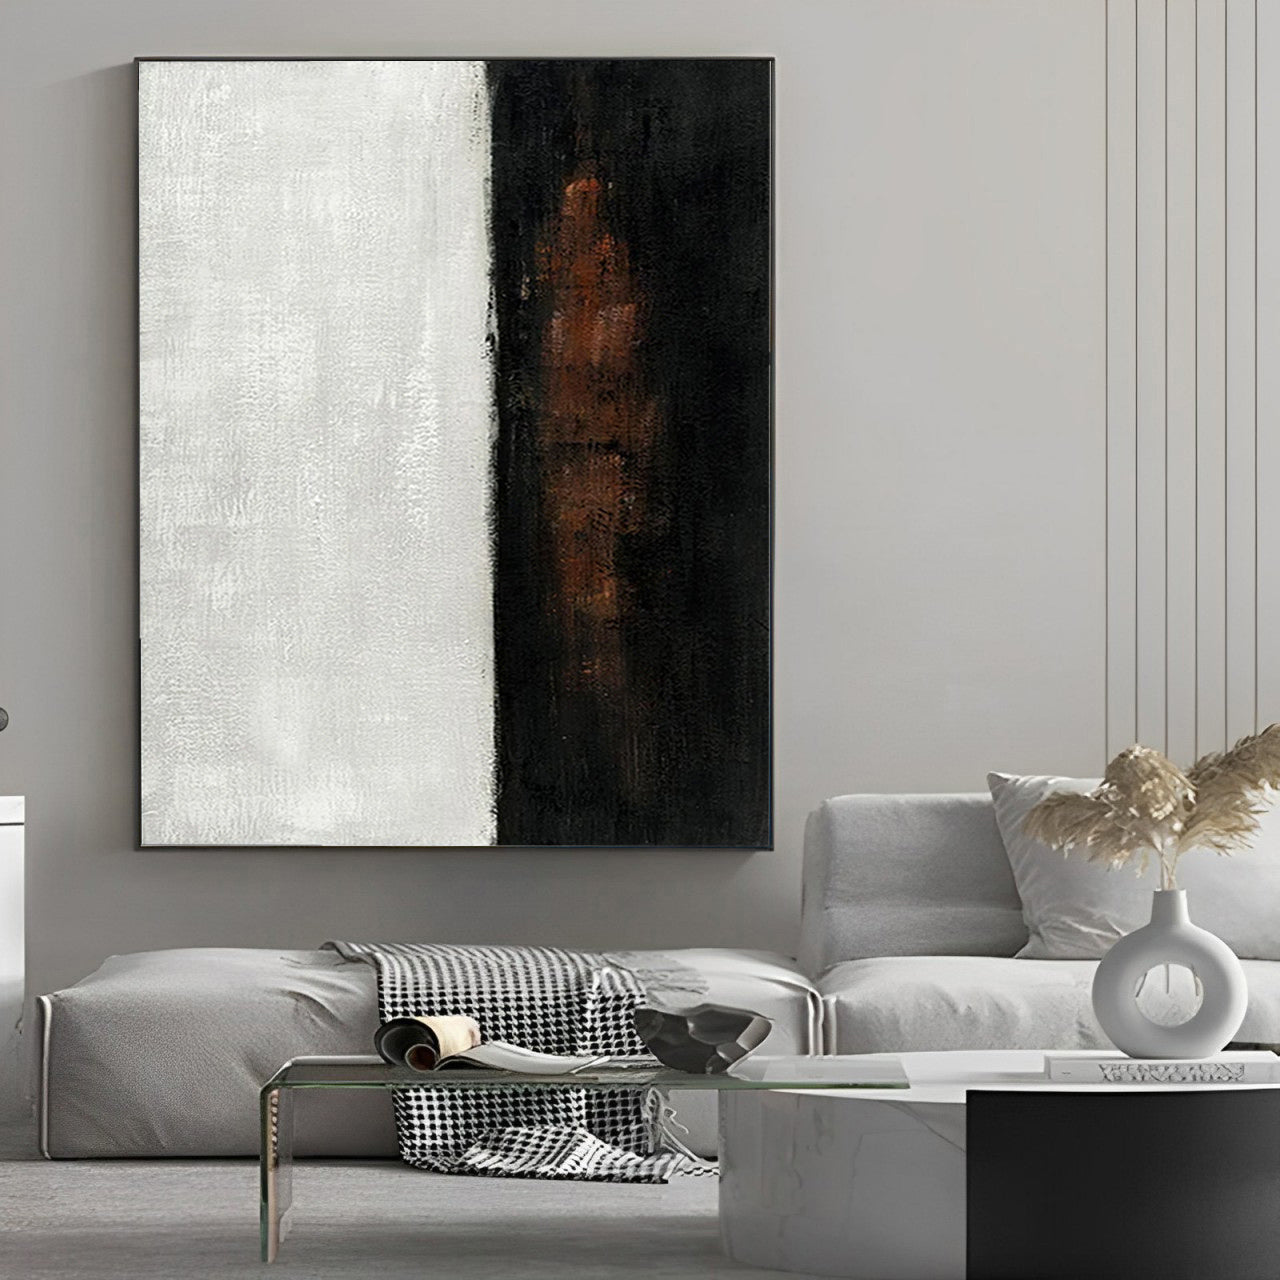 Meagre - Large Minimal Red, White and Black Painting on Canvas